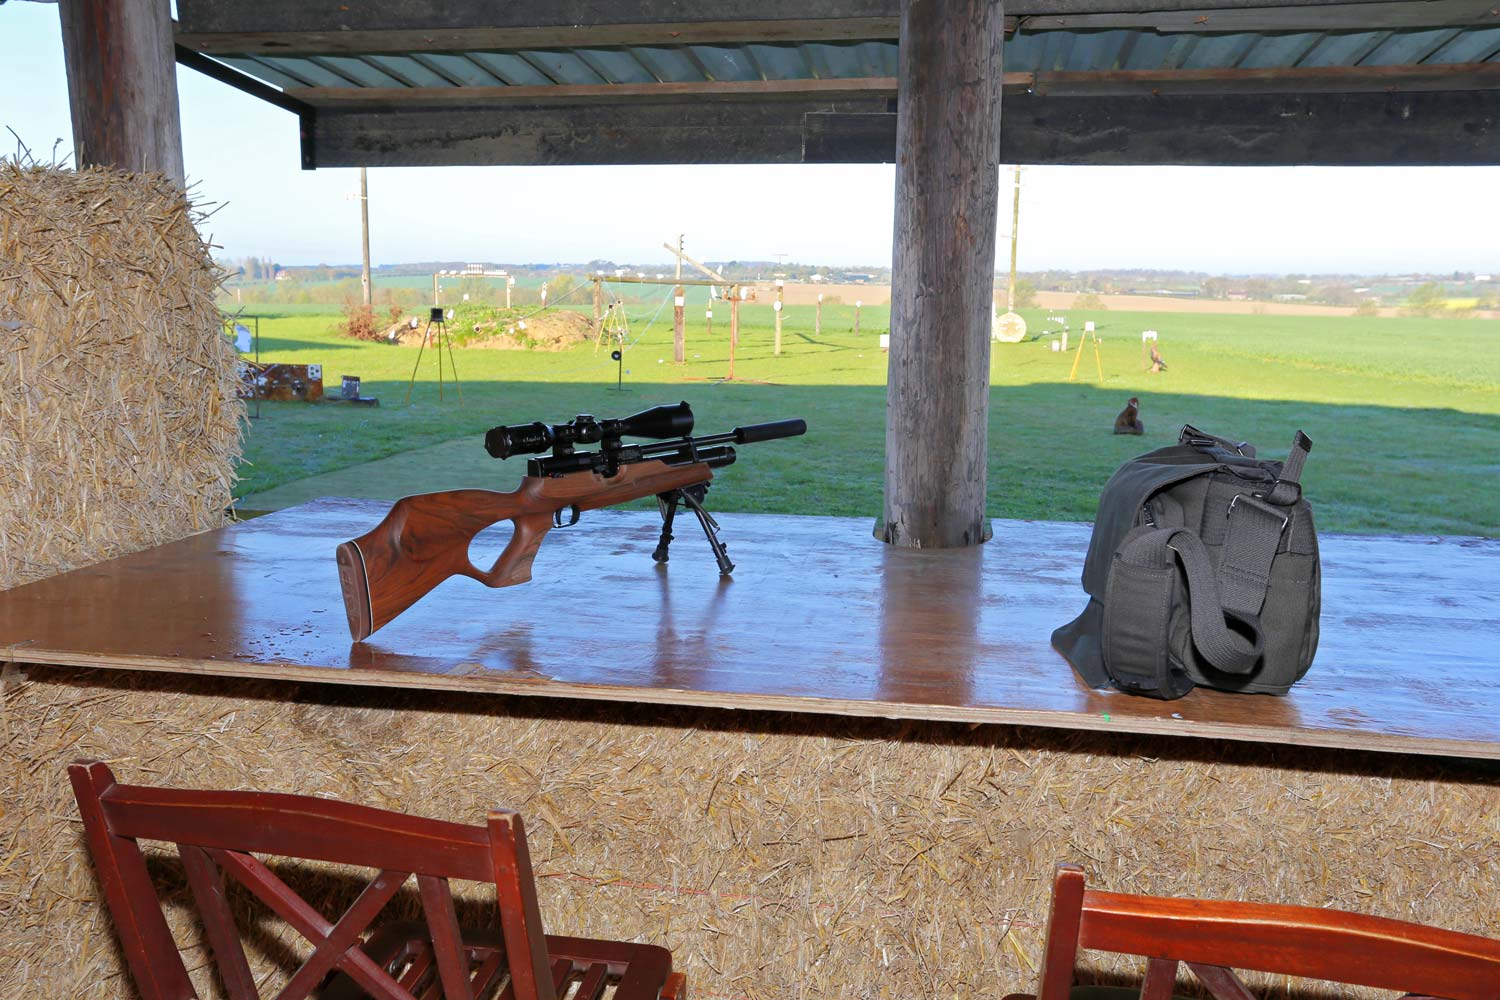 The Outdoor shooting range with covered positions